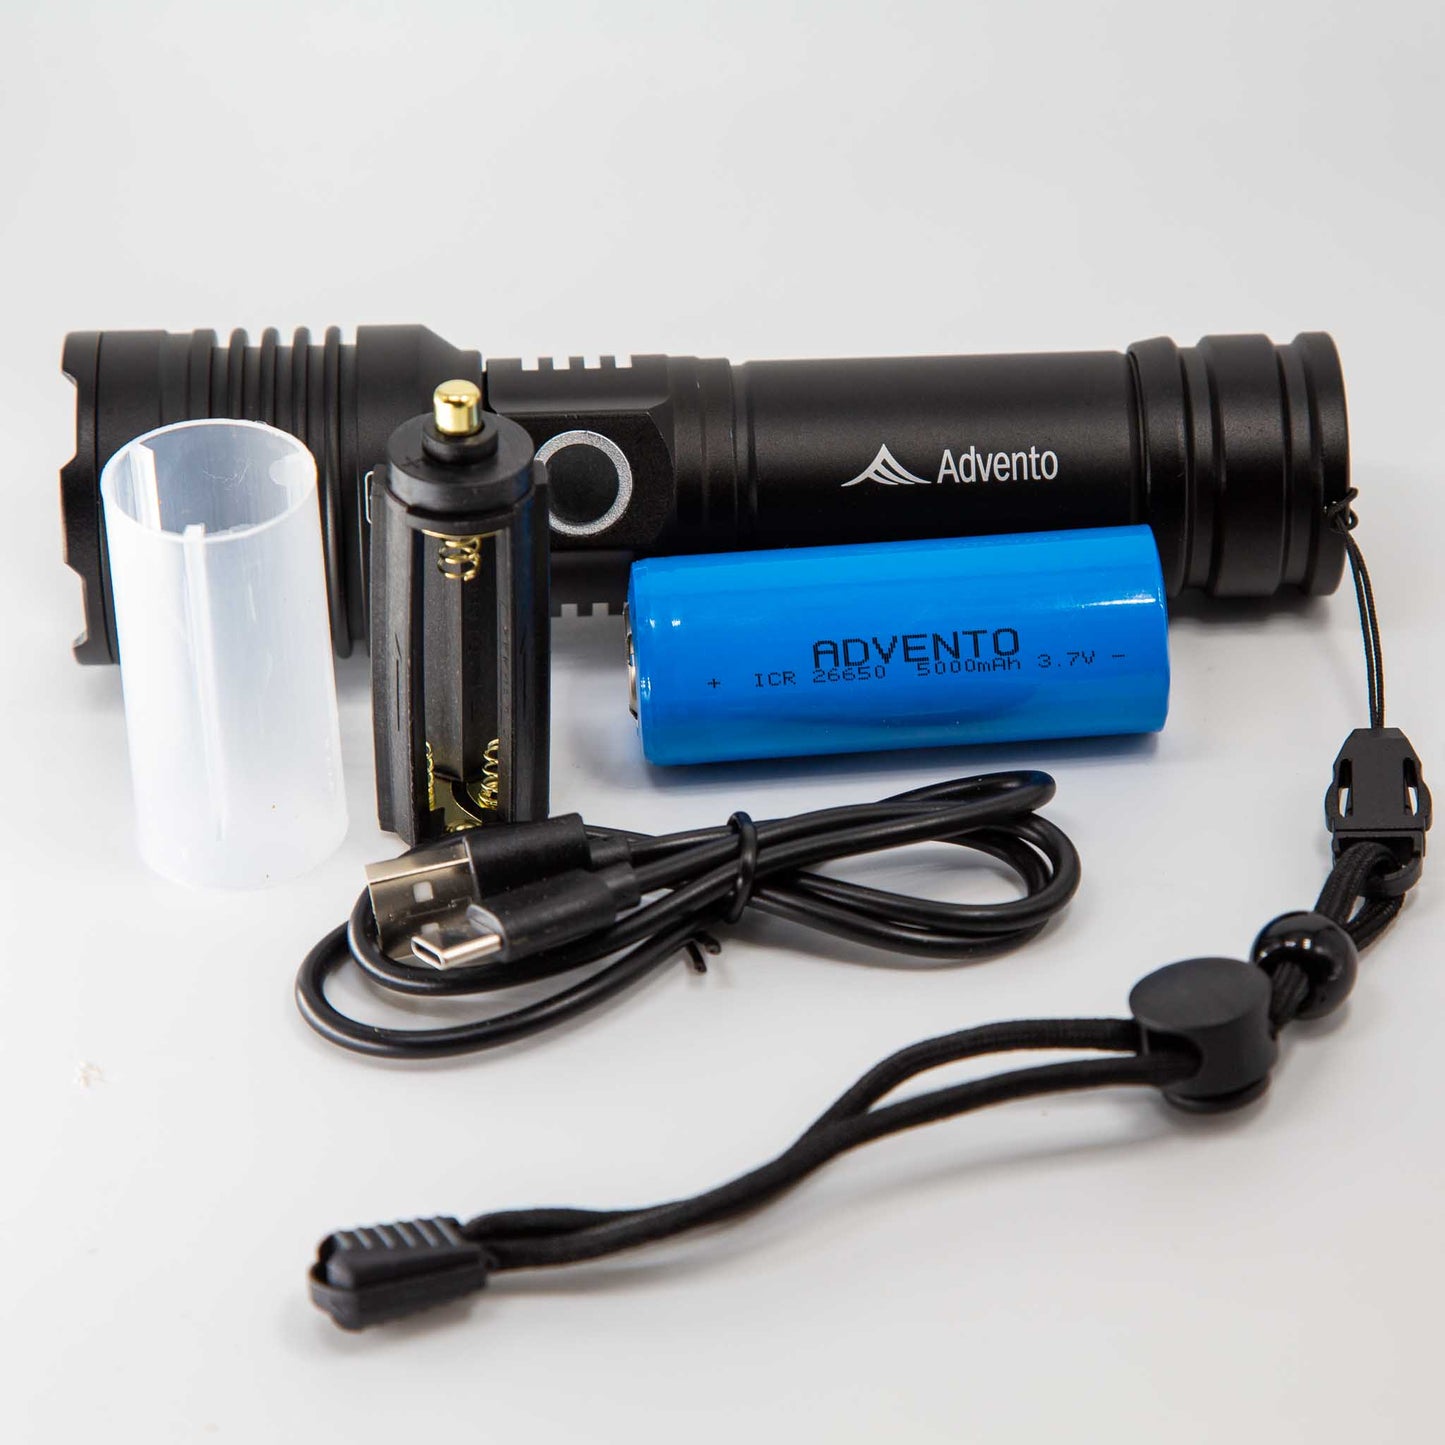 xhp50 Rechargeable powerful flashlight With 5 Light Modes